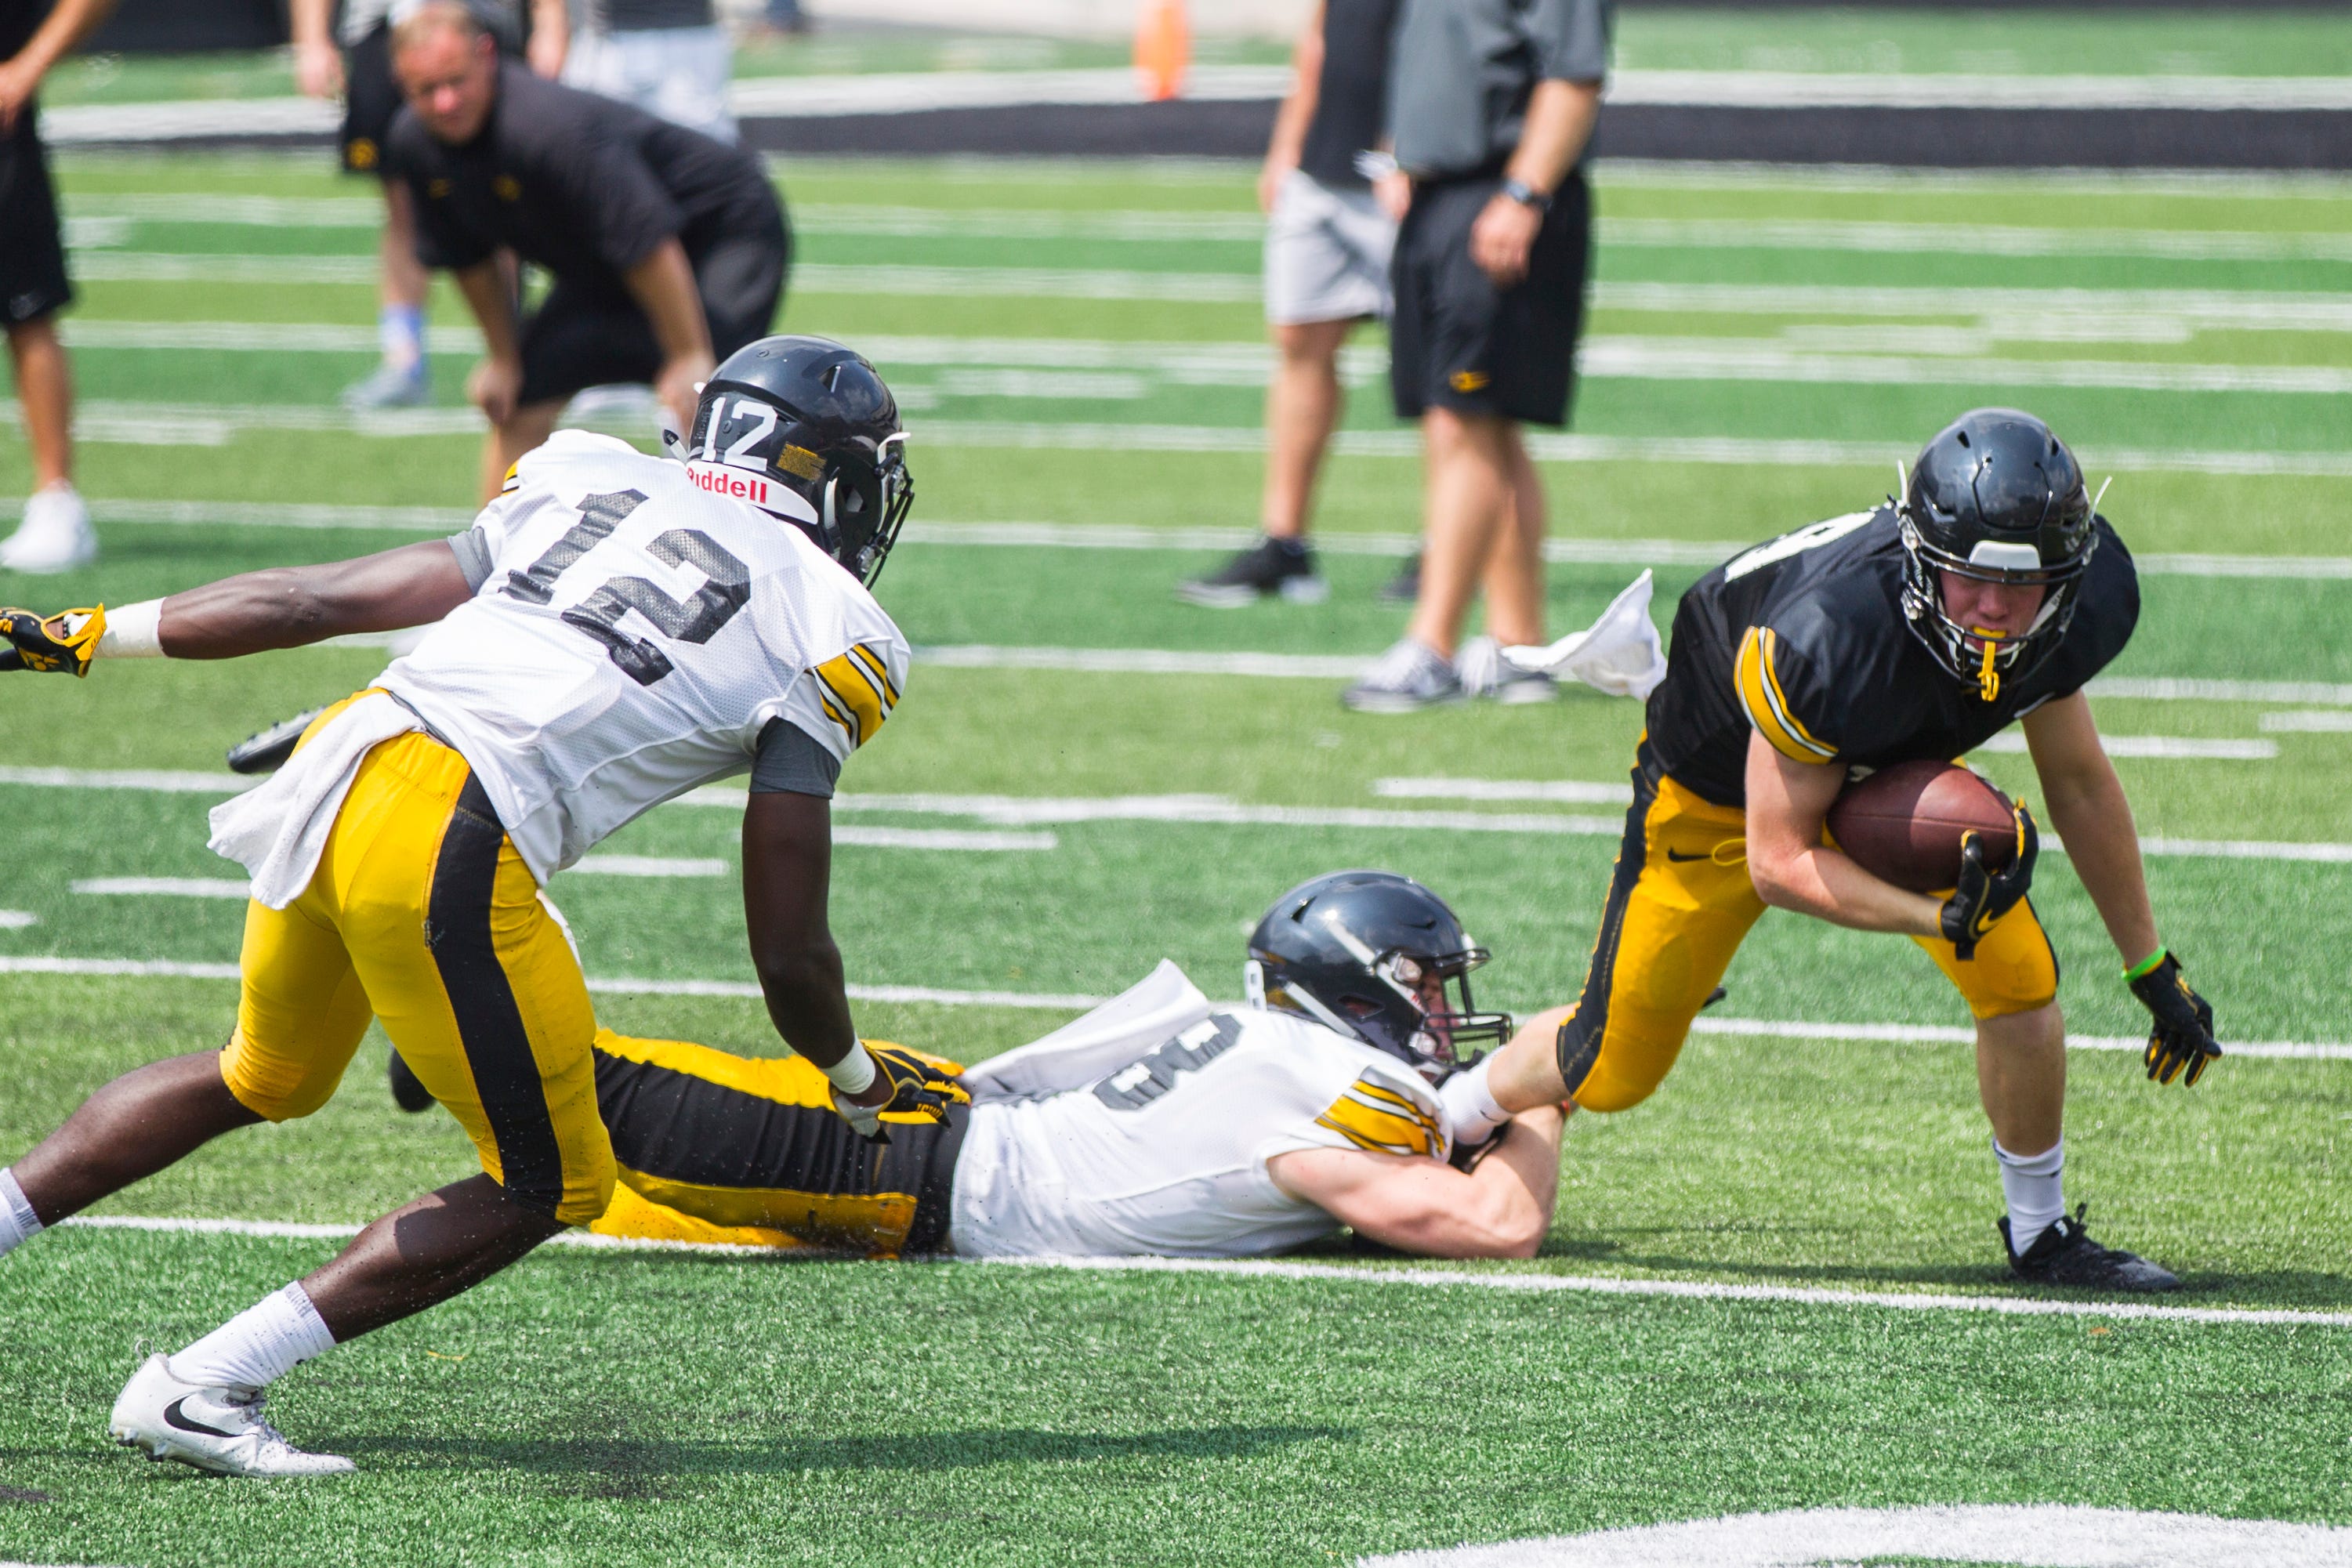 Iowa wide receiver Max Cooper attempts to shed a tackle from defensive back John Milani as D.J. Johnson (12) closes in during a Kids Day practice on Saturday, Aug. 11, 2018, at Kinnick Stadium in Iowa City.